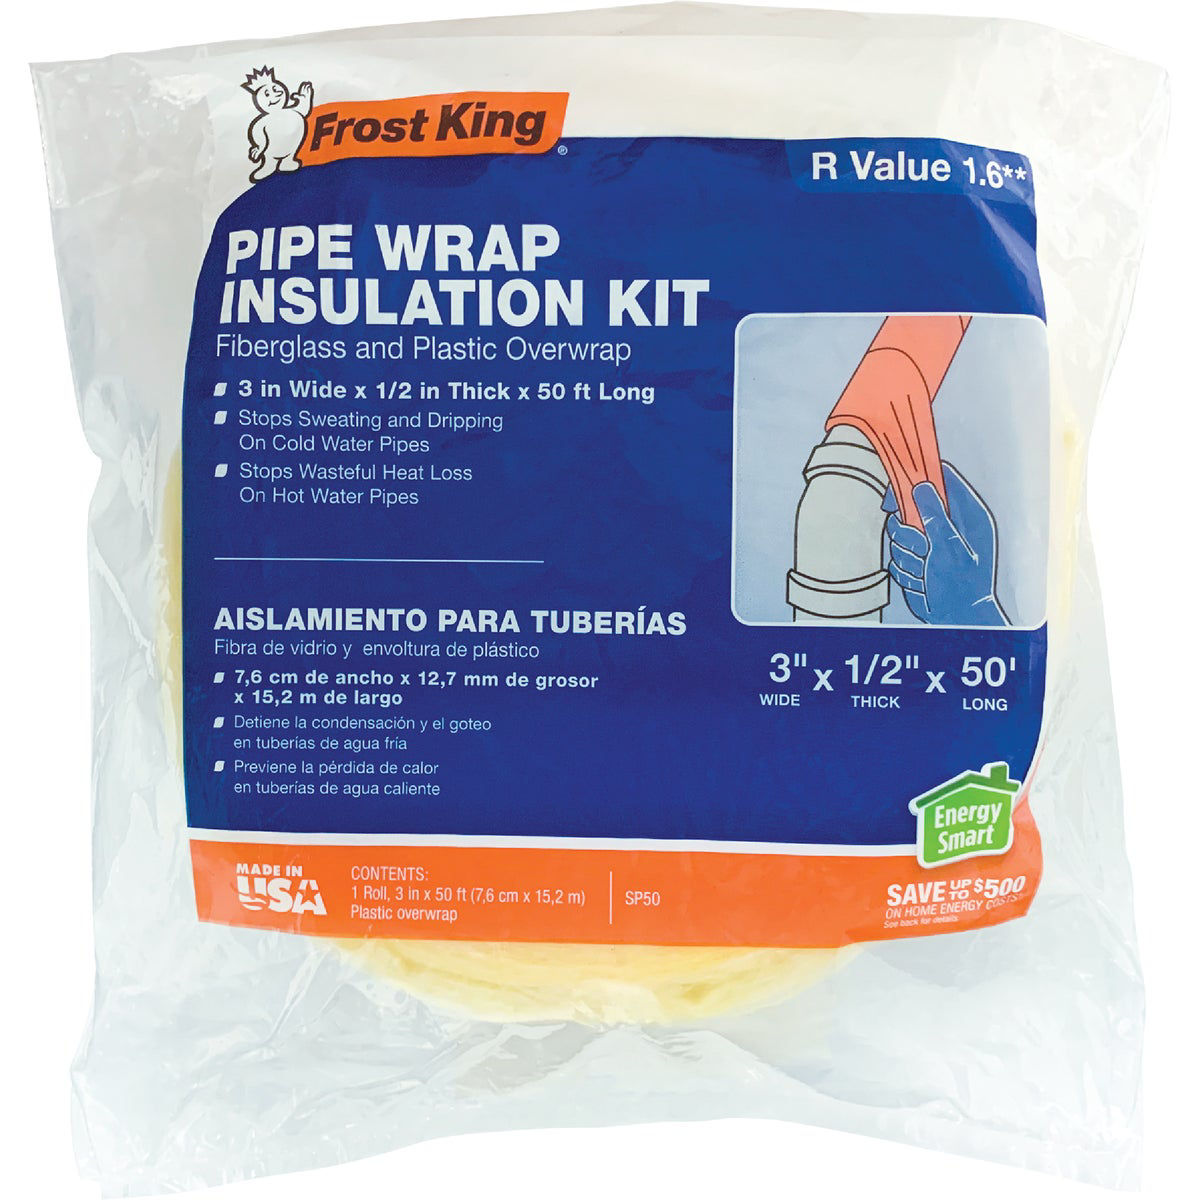 Frost King 1/2 In. x 3 In. x 50 Ft. Fiberglass Pipe Insulation